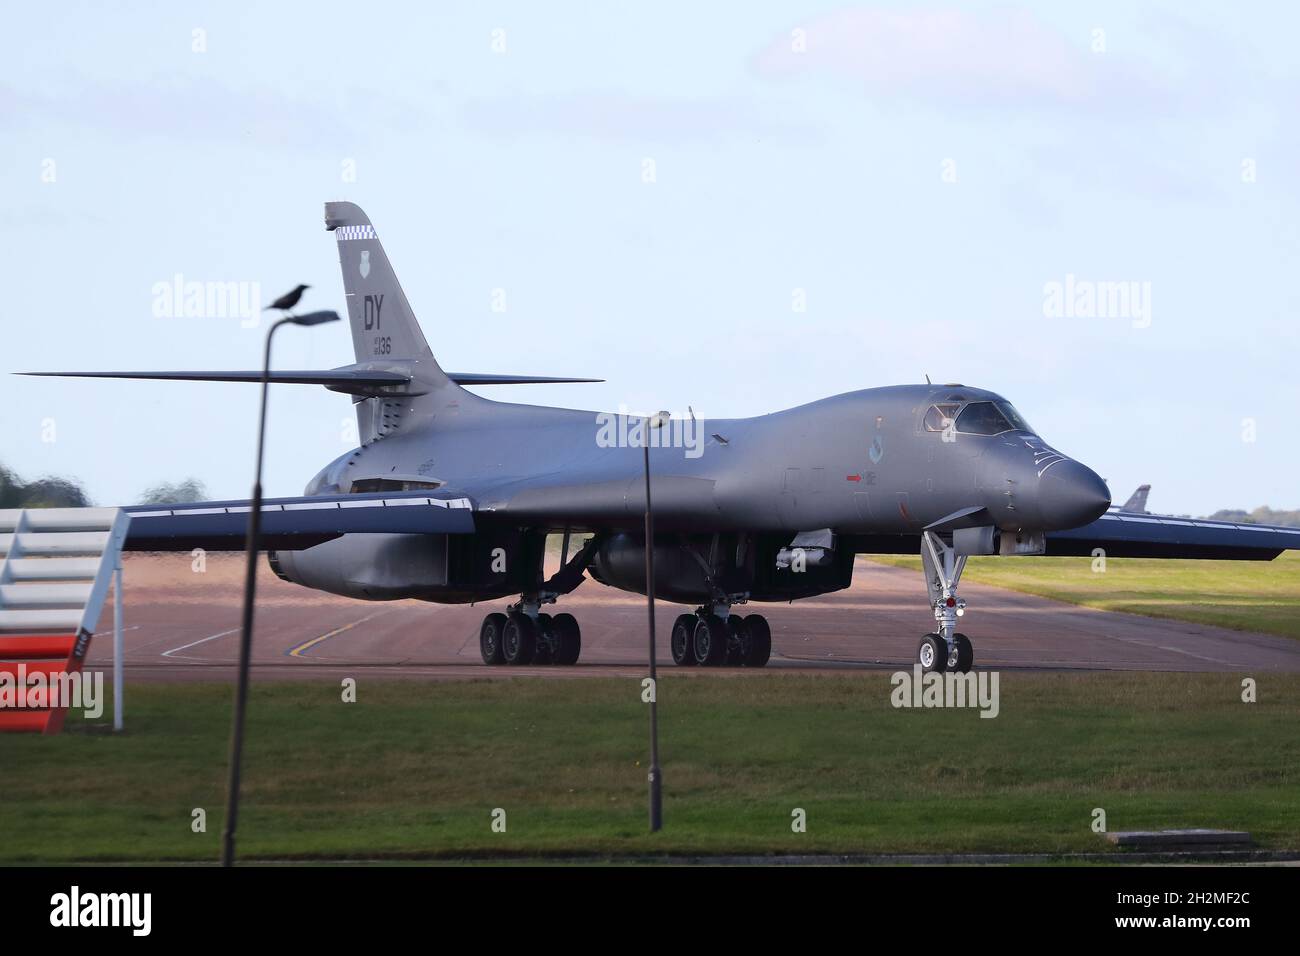 A USAF Rockwell B1-B Lancer variable-sweep wing Strategic Bomber taxiing at RAF Fairford, UK Stock Photo